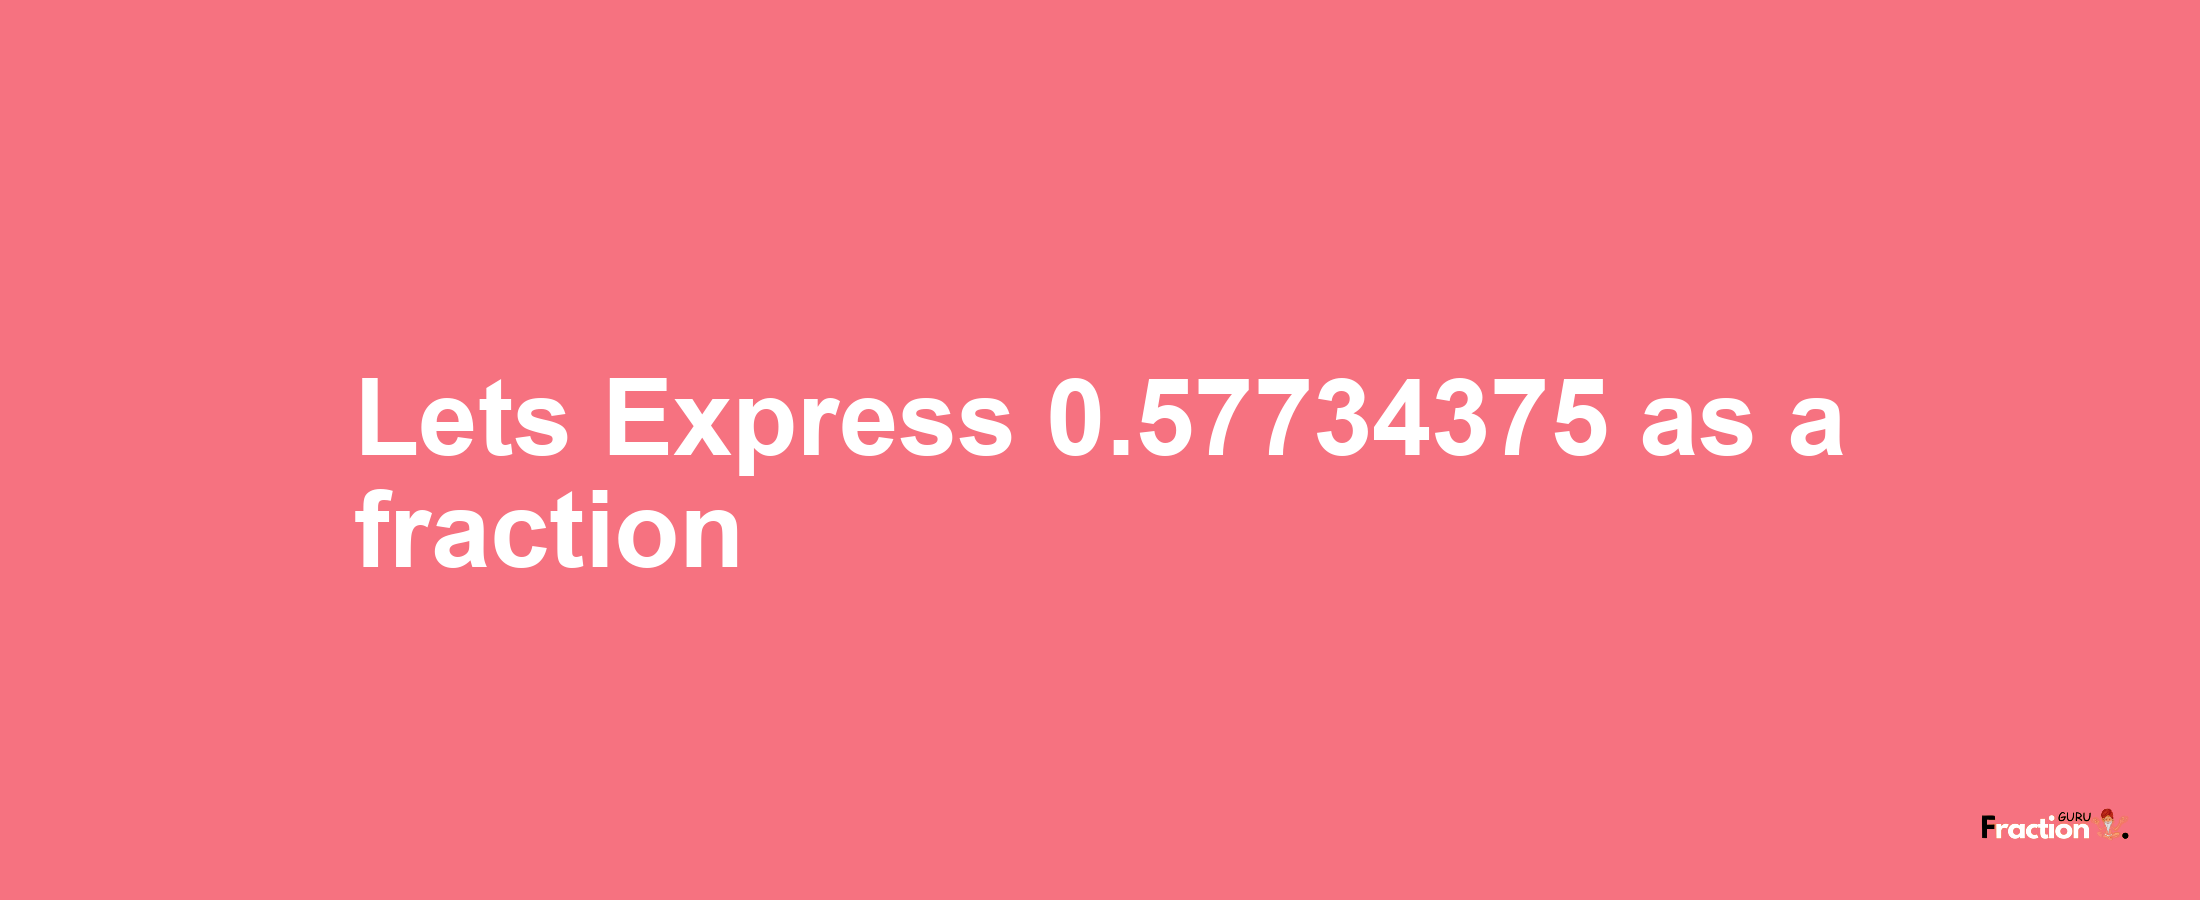 Lets Express 0.57734375 as afraction